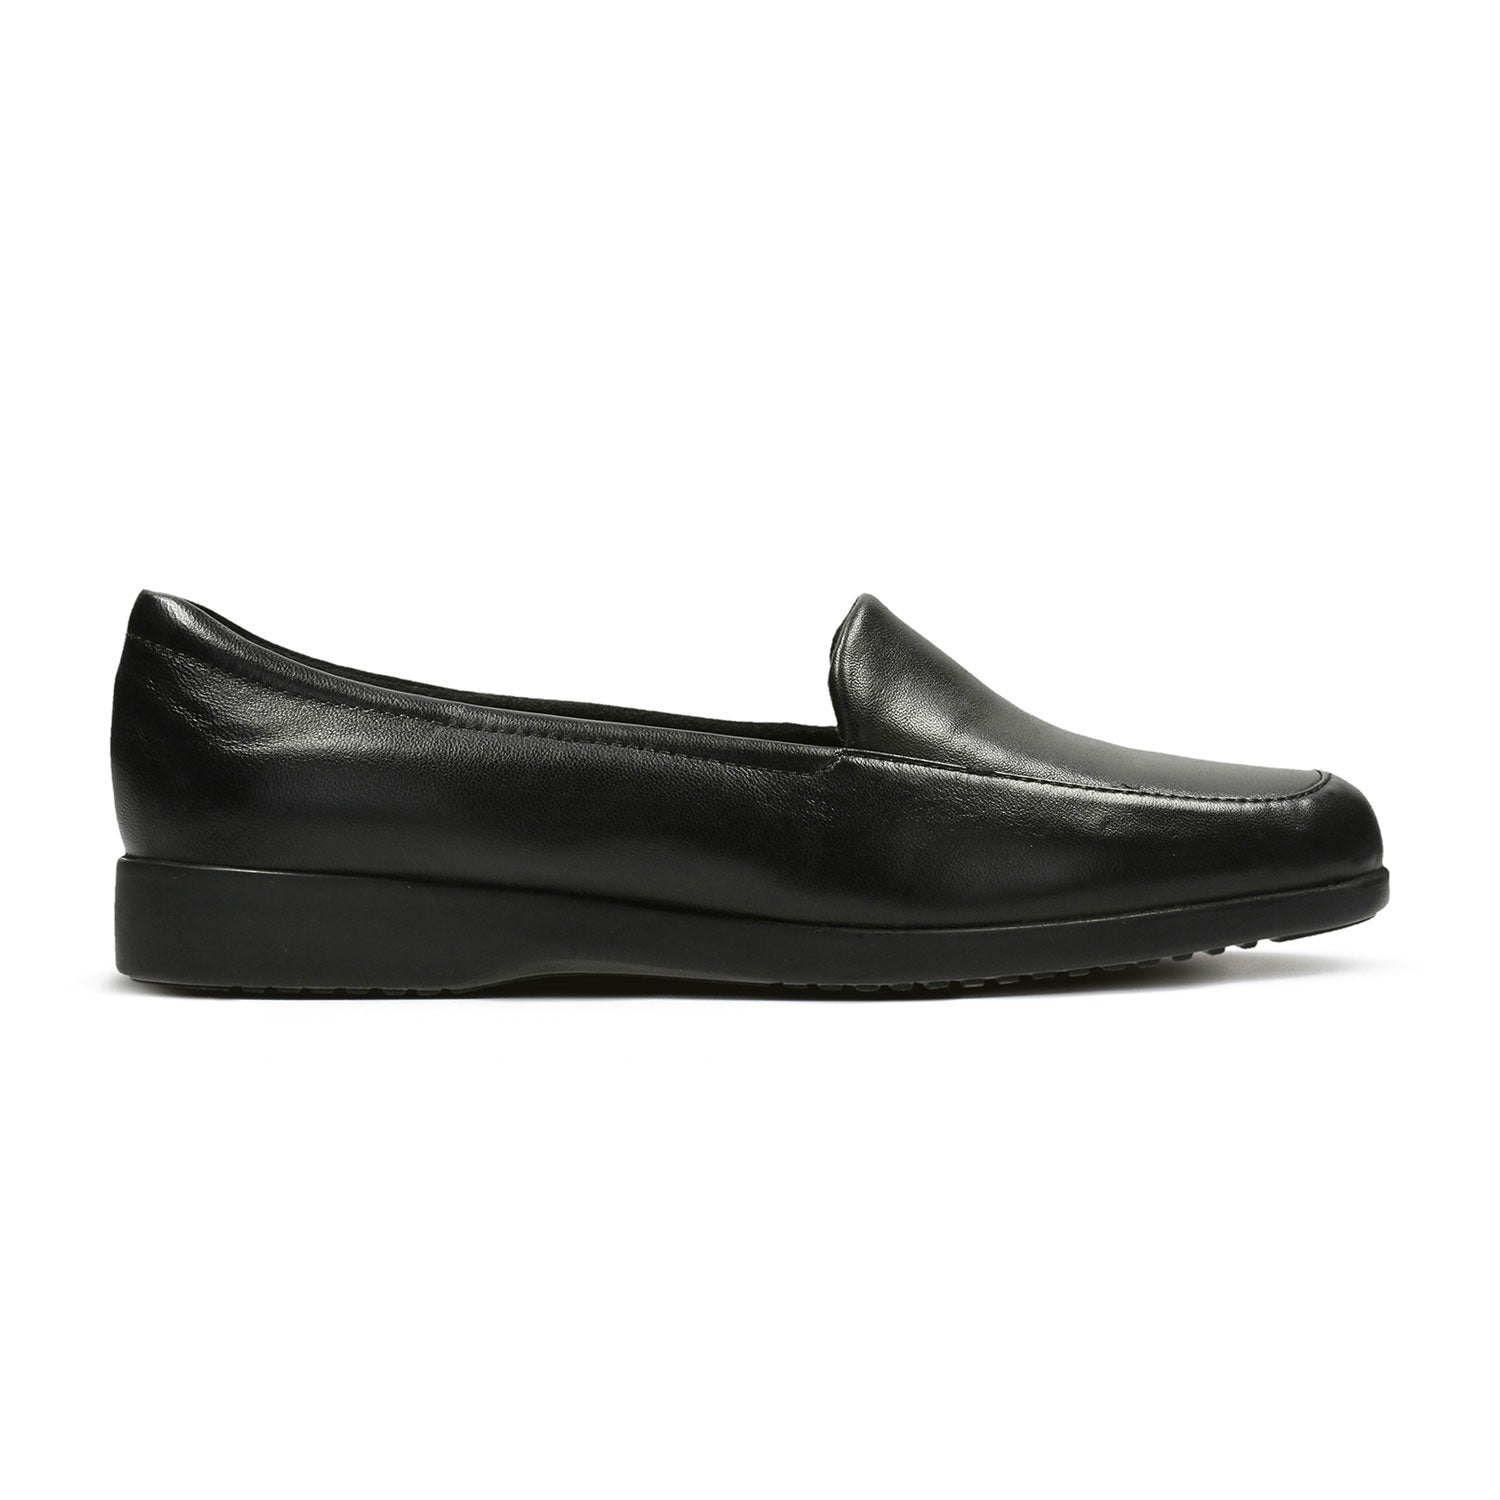 Clarks Georgia Shoes - Black Leather - 002547937 - EE Width (Extra Wide Fit)